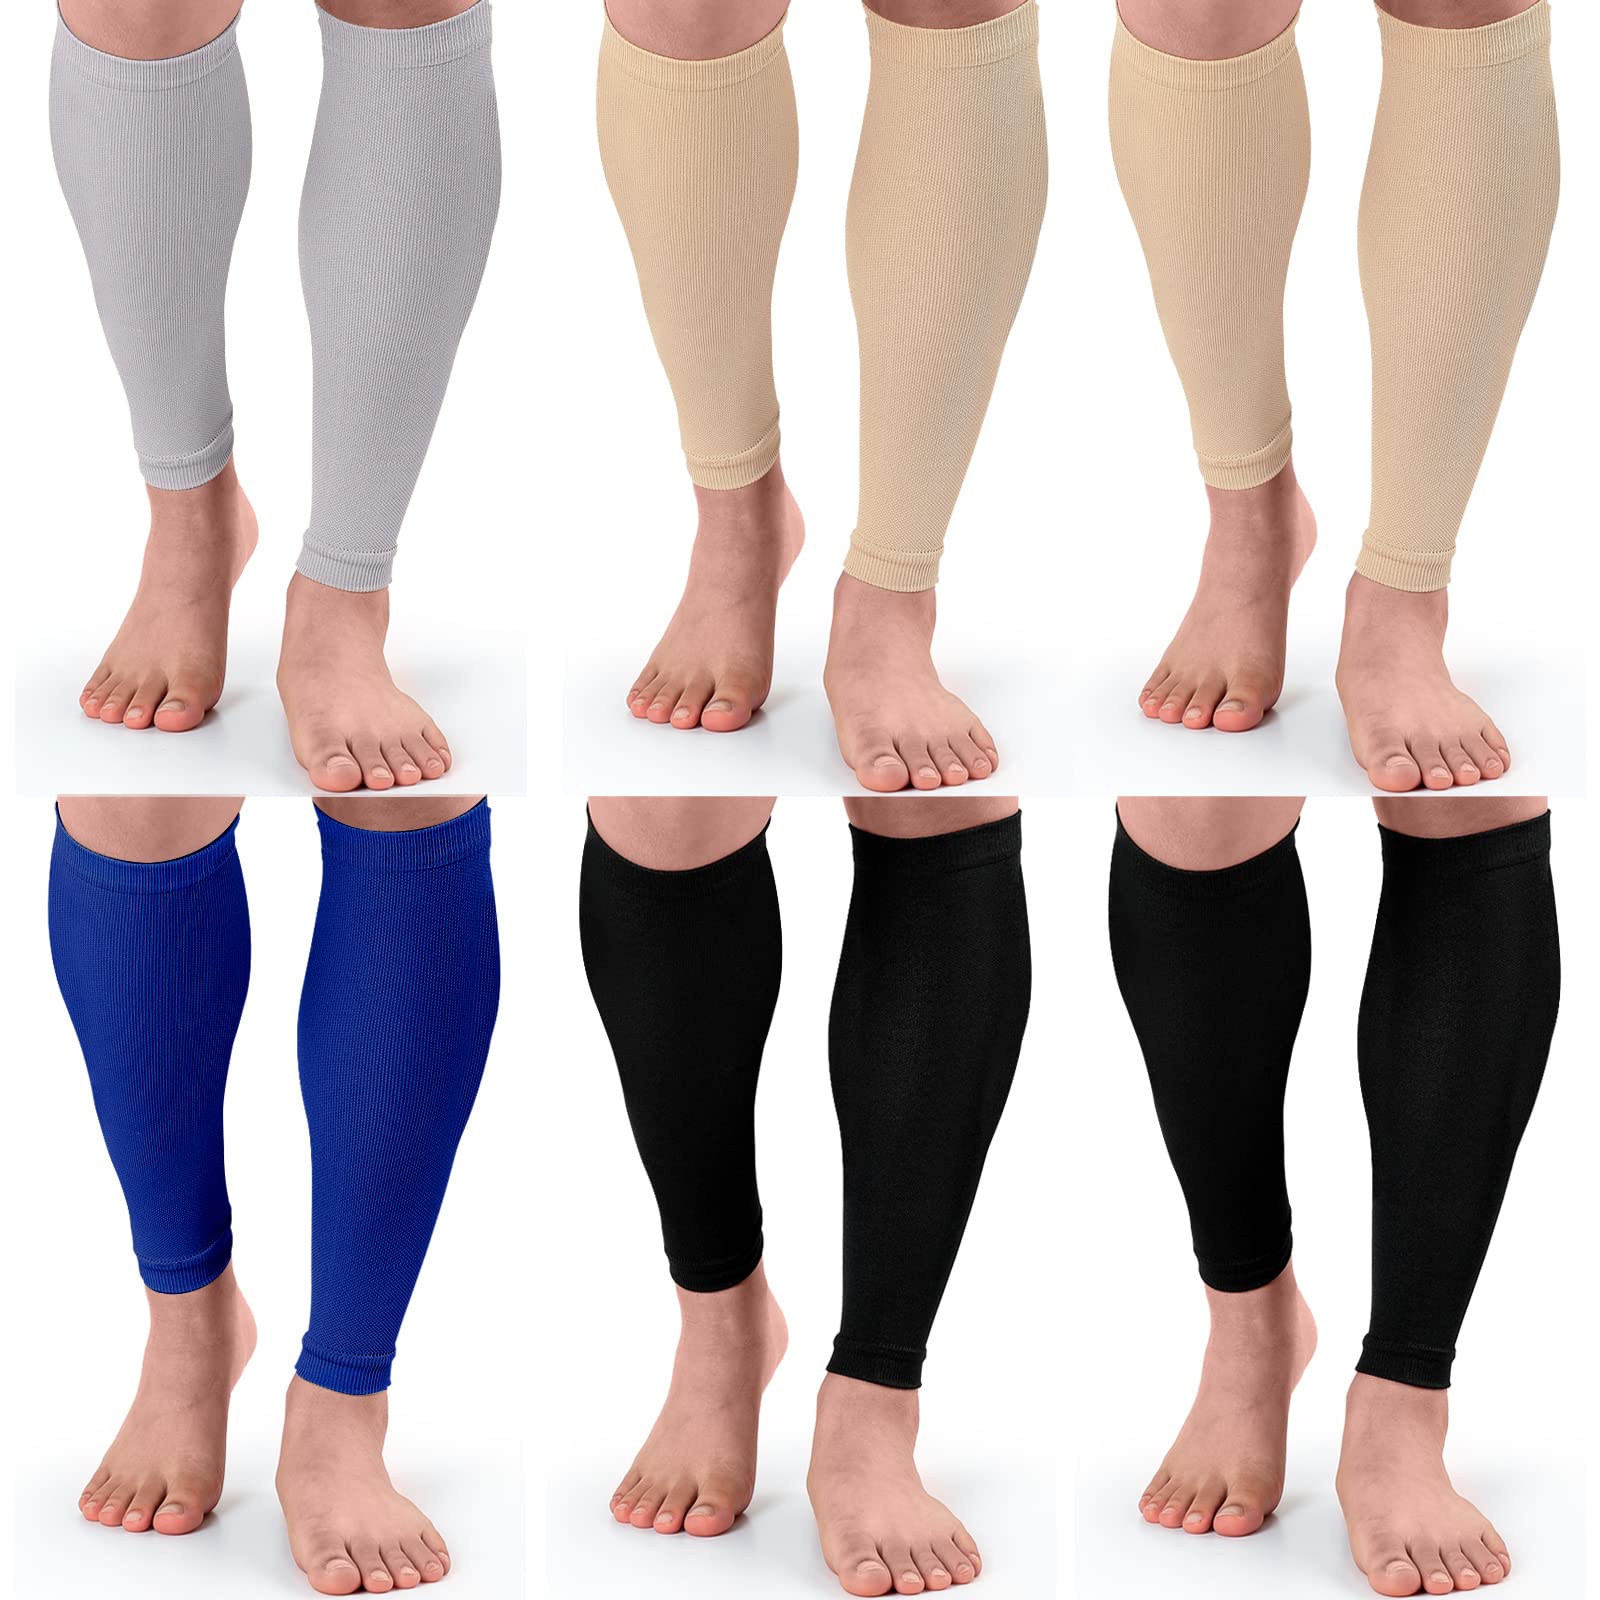 Calf Compression Sleeves for Men Women, Footless Compression Socks